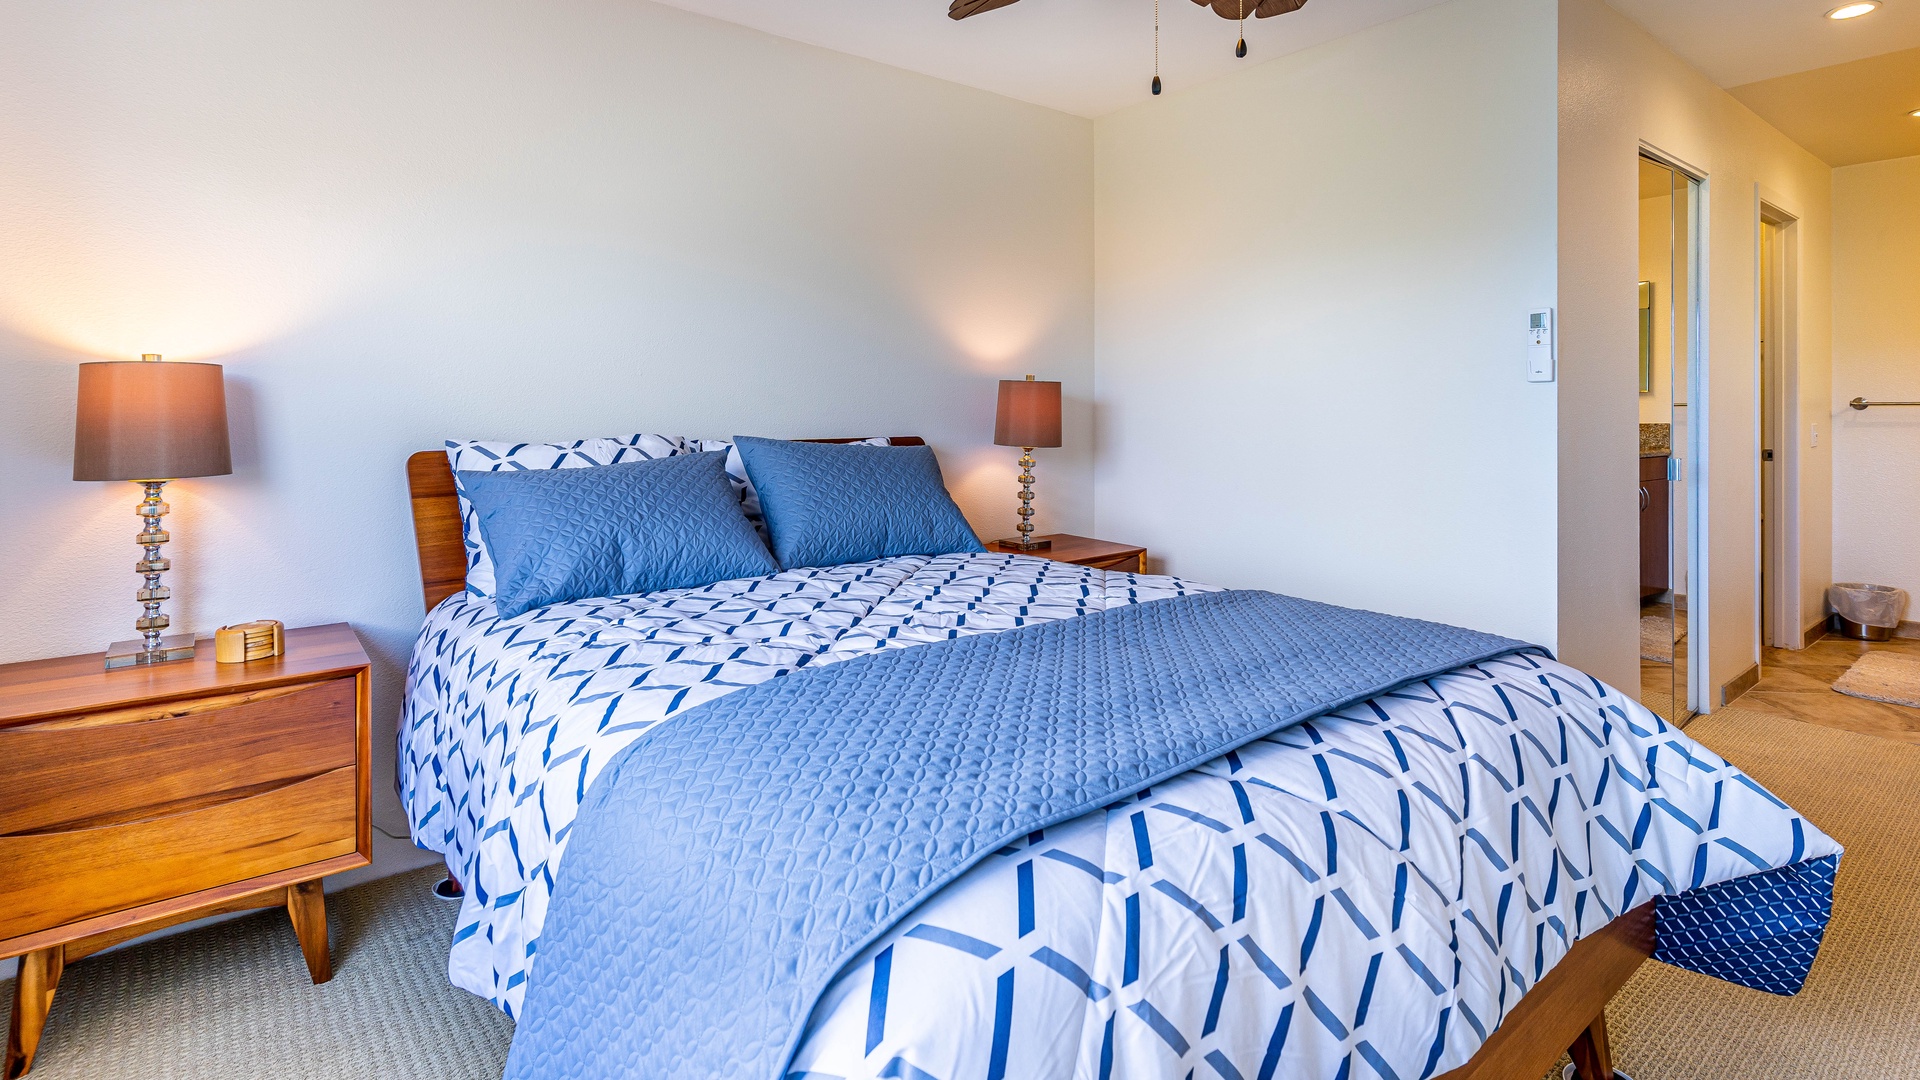 Kapolei Vacation Rentals, Fairways at Ko Olina 20G - The primary guest bedroom with comfortable and spacious accommodations.